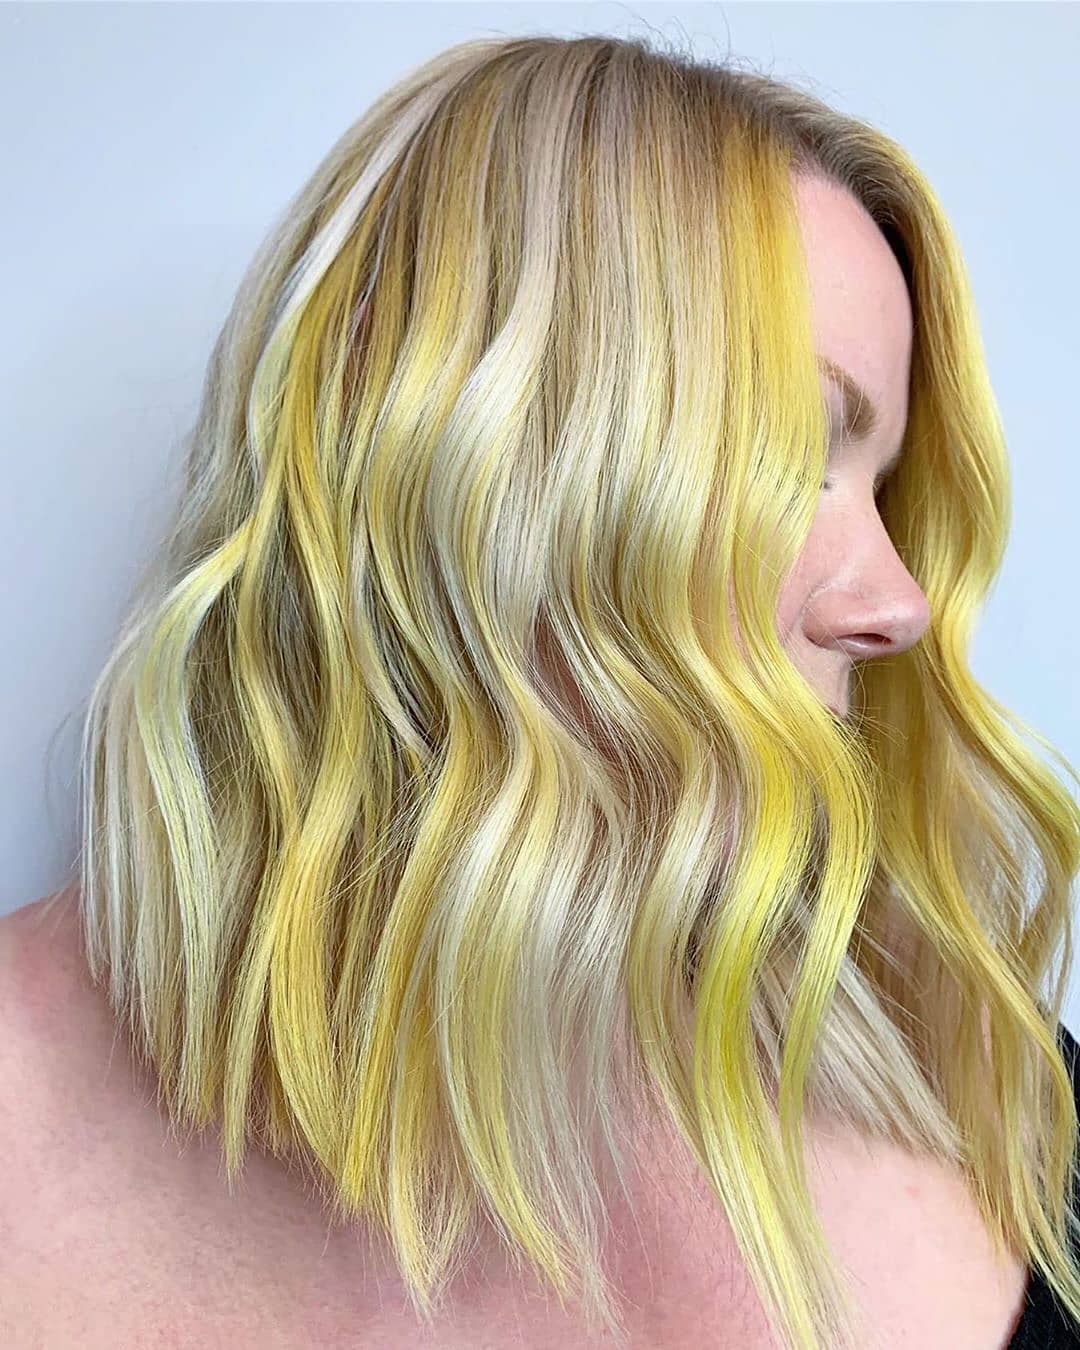 10 Ombre Balayage Lob Hair Styles with a Color Surprise!